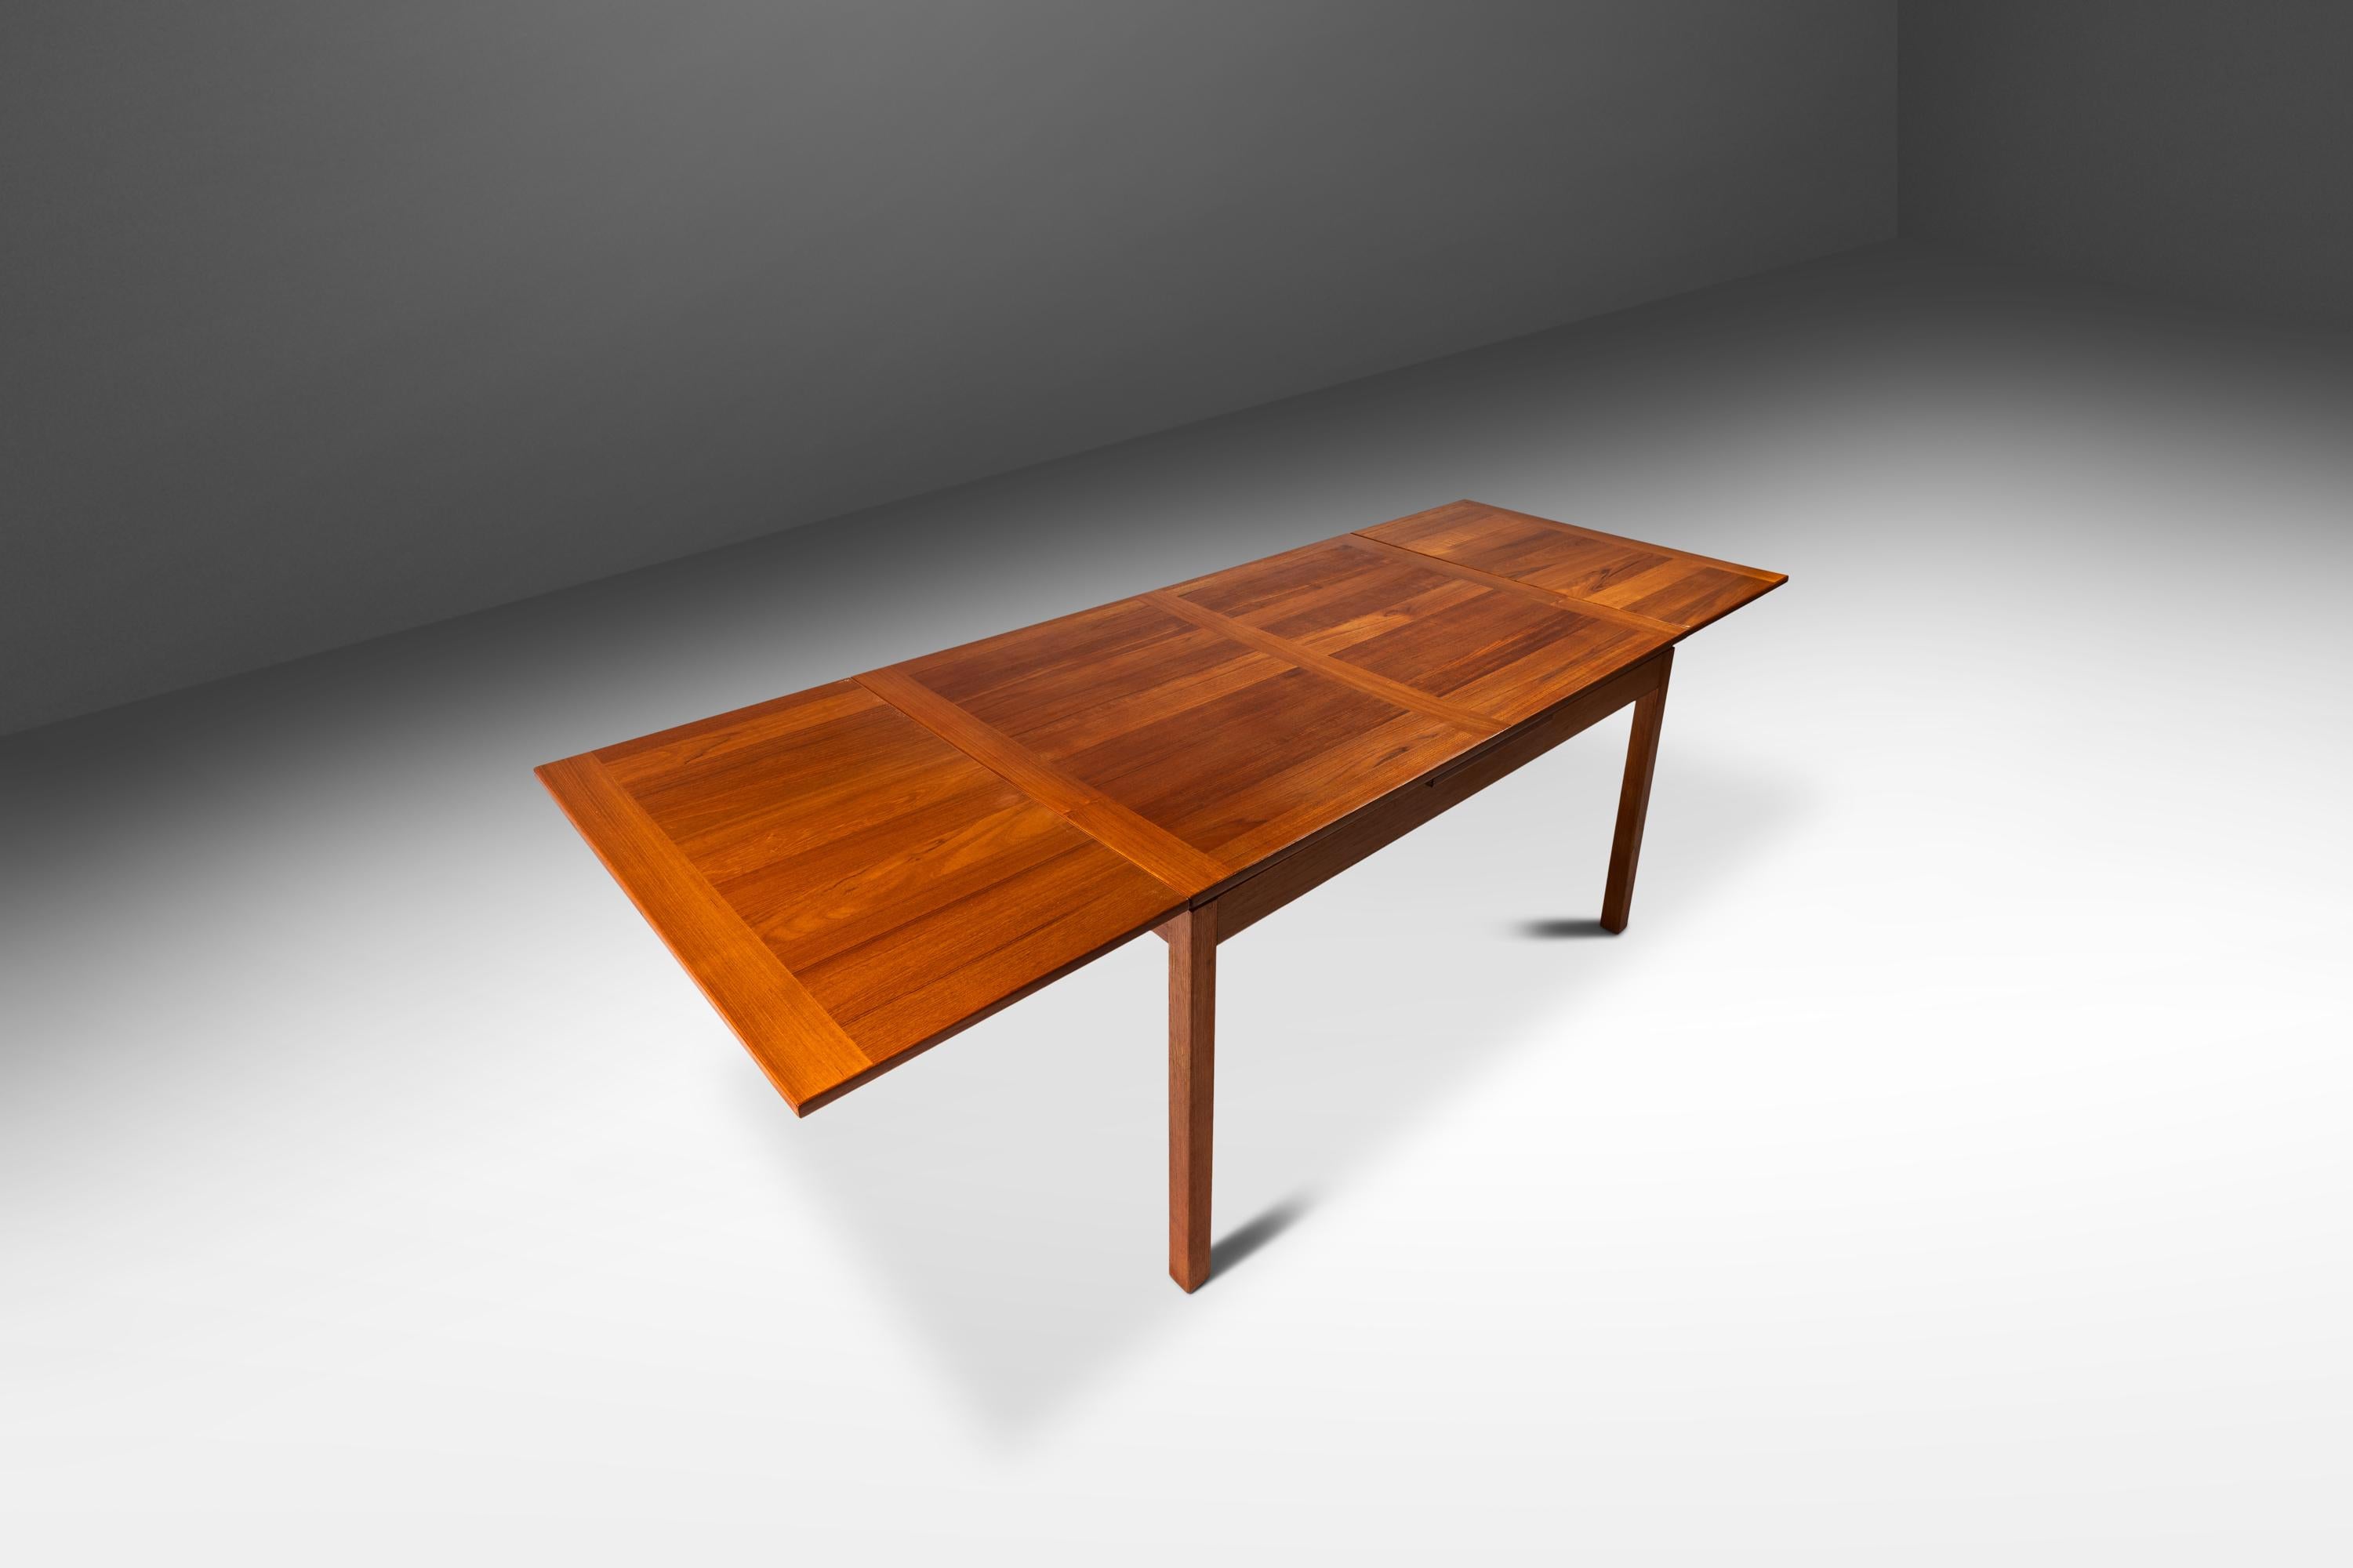 Late 20th Century Danish Teak Extension Dining Table with Stow-in-Table Leaves, Denmark, c. 1970s For Sale